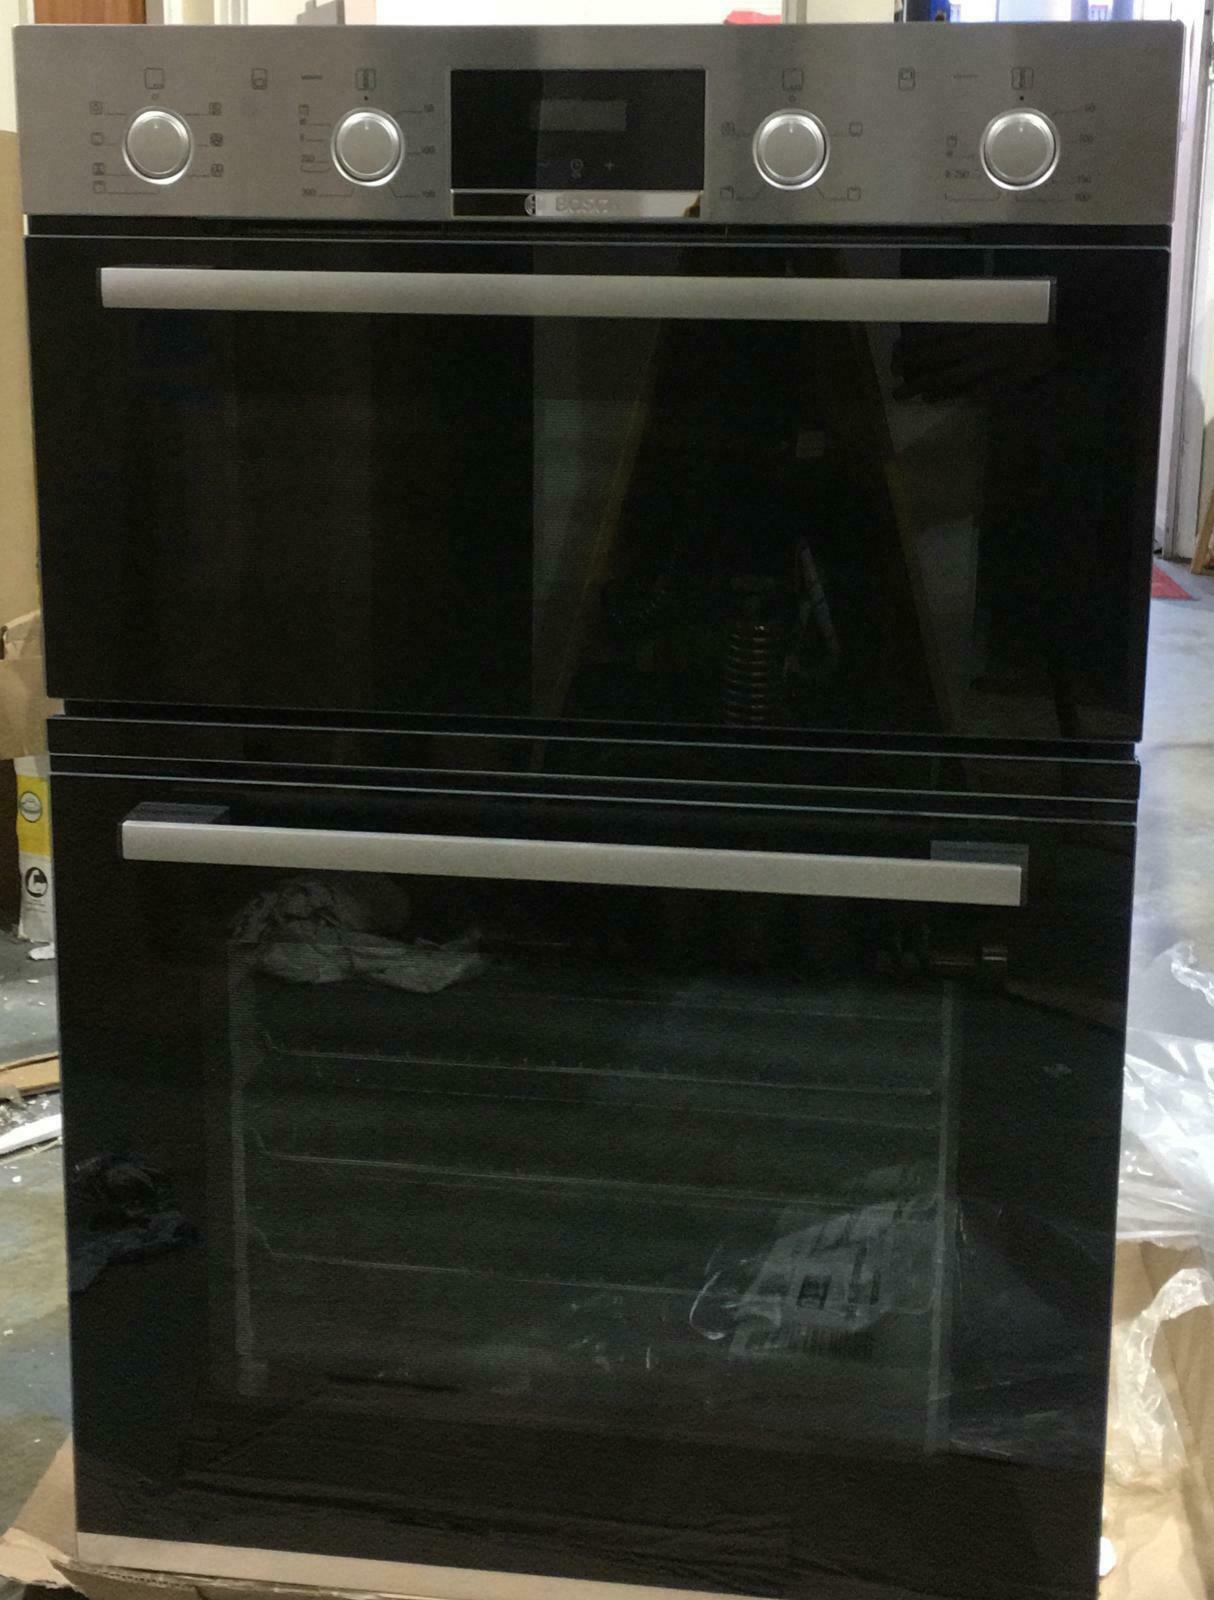 Bosch MBS533BS0B Silver Built-in Electric Double oven- 3340